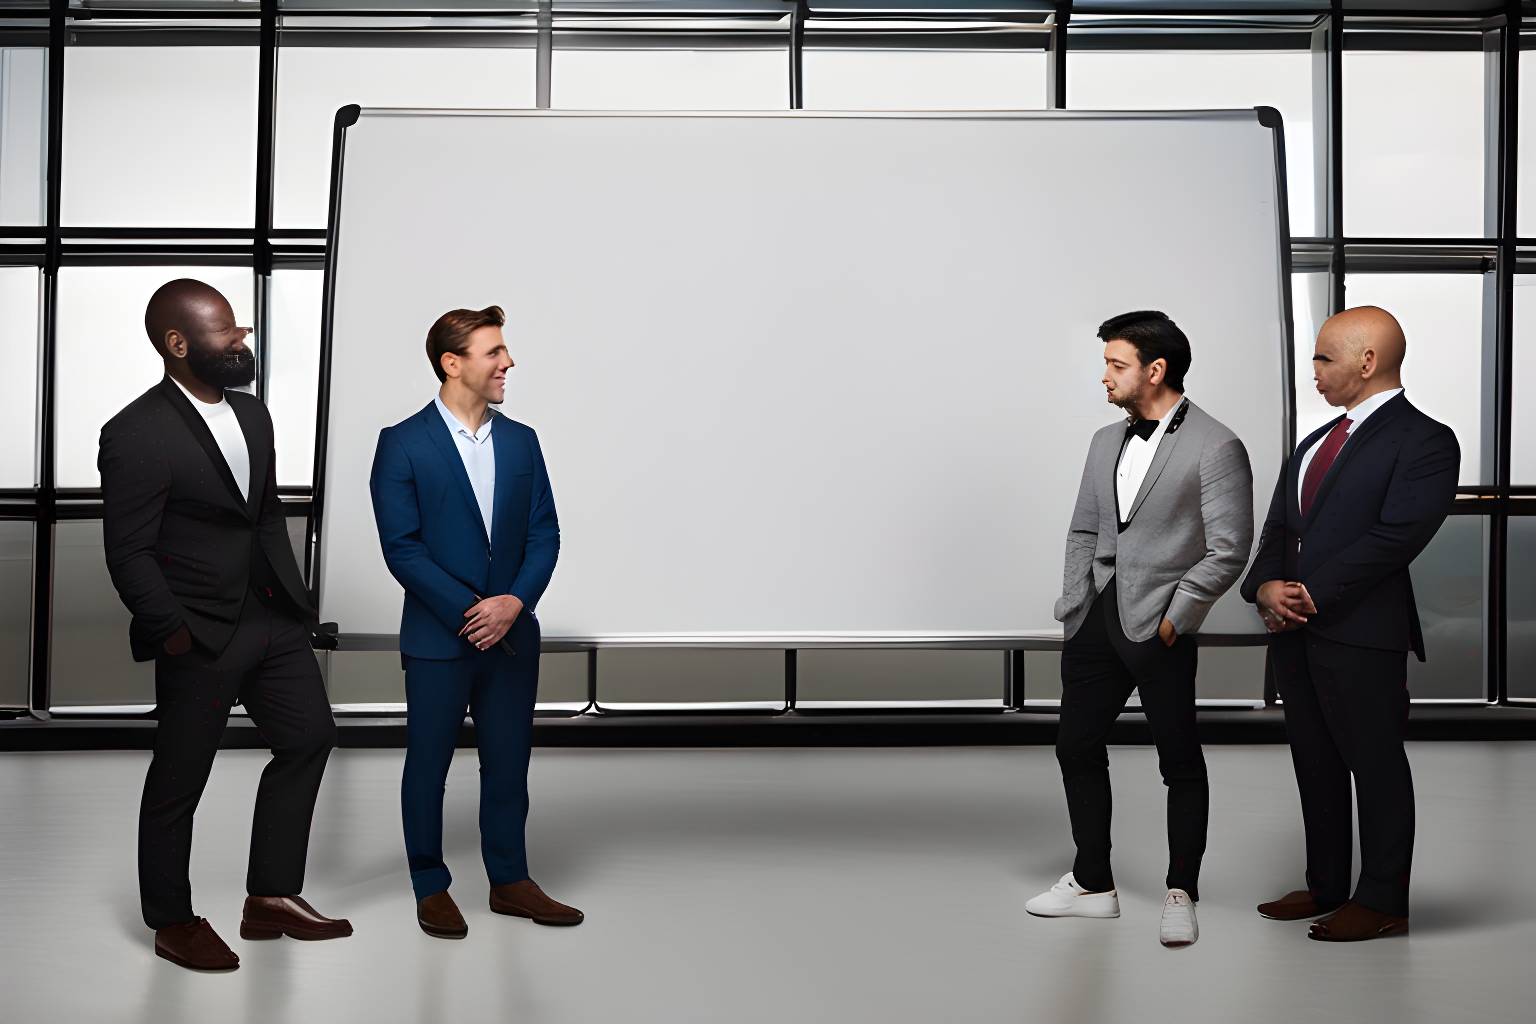 Breathtaking photograph of a group of people standing around a white board.